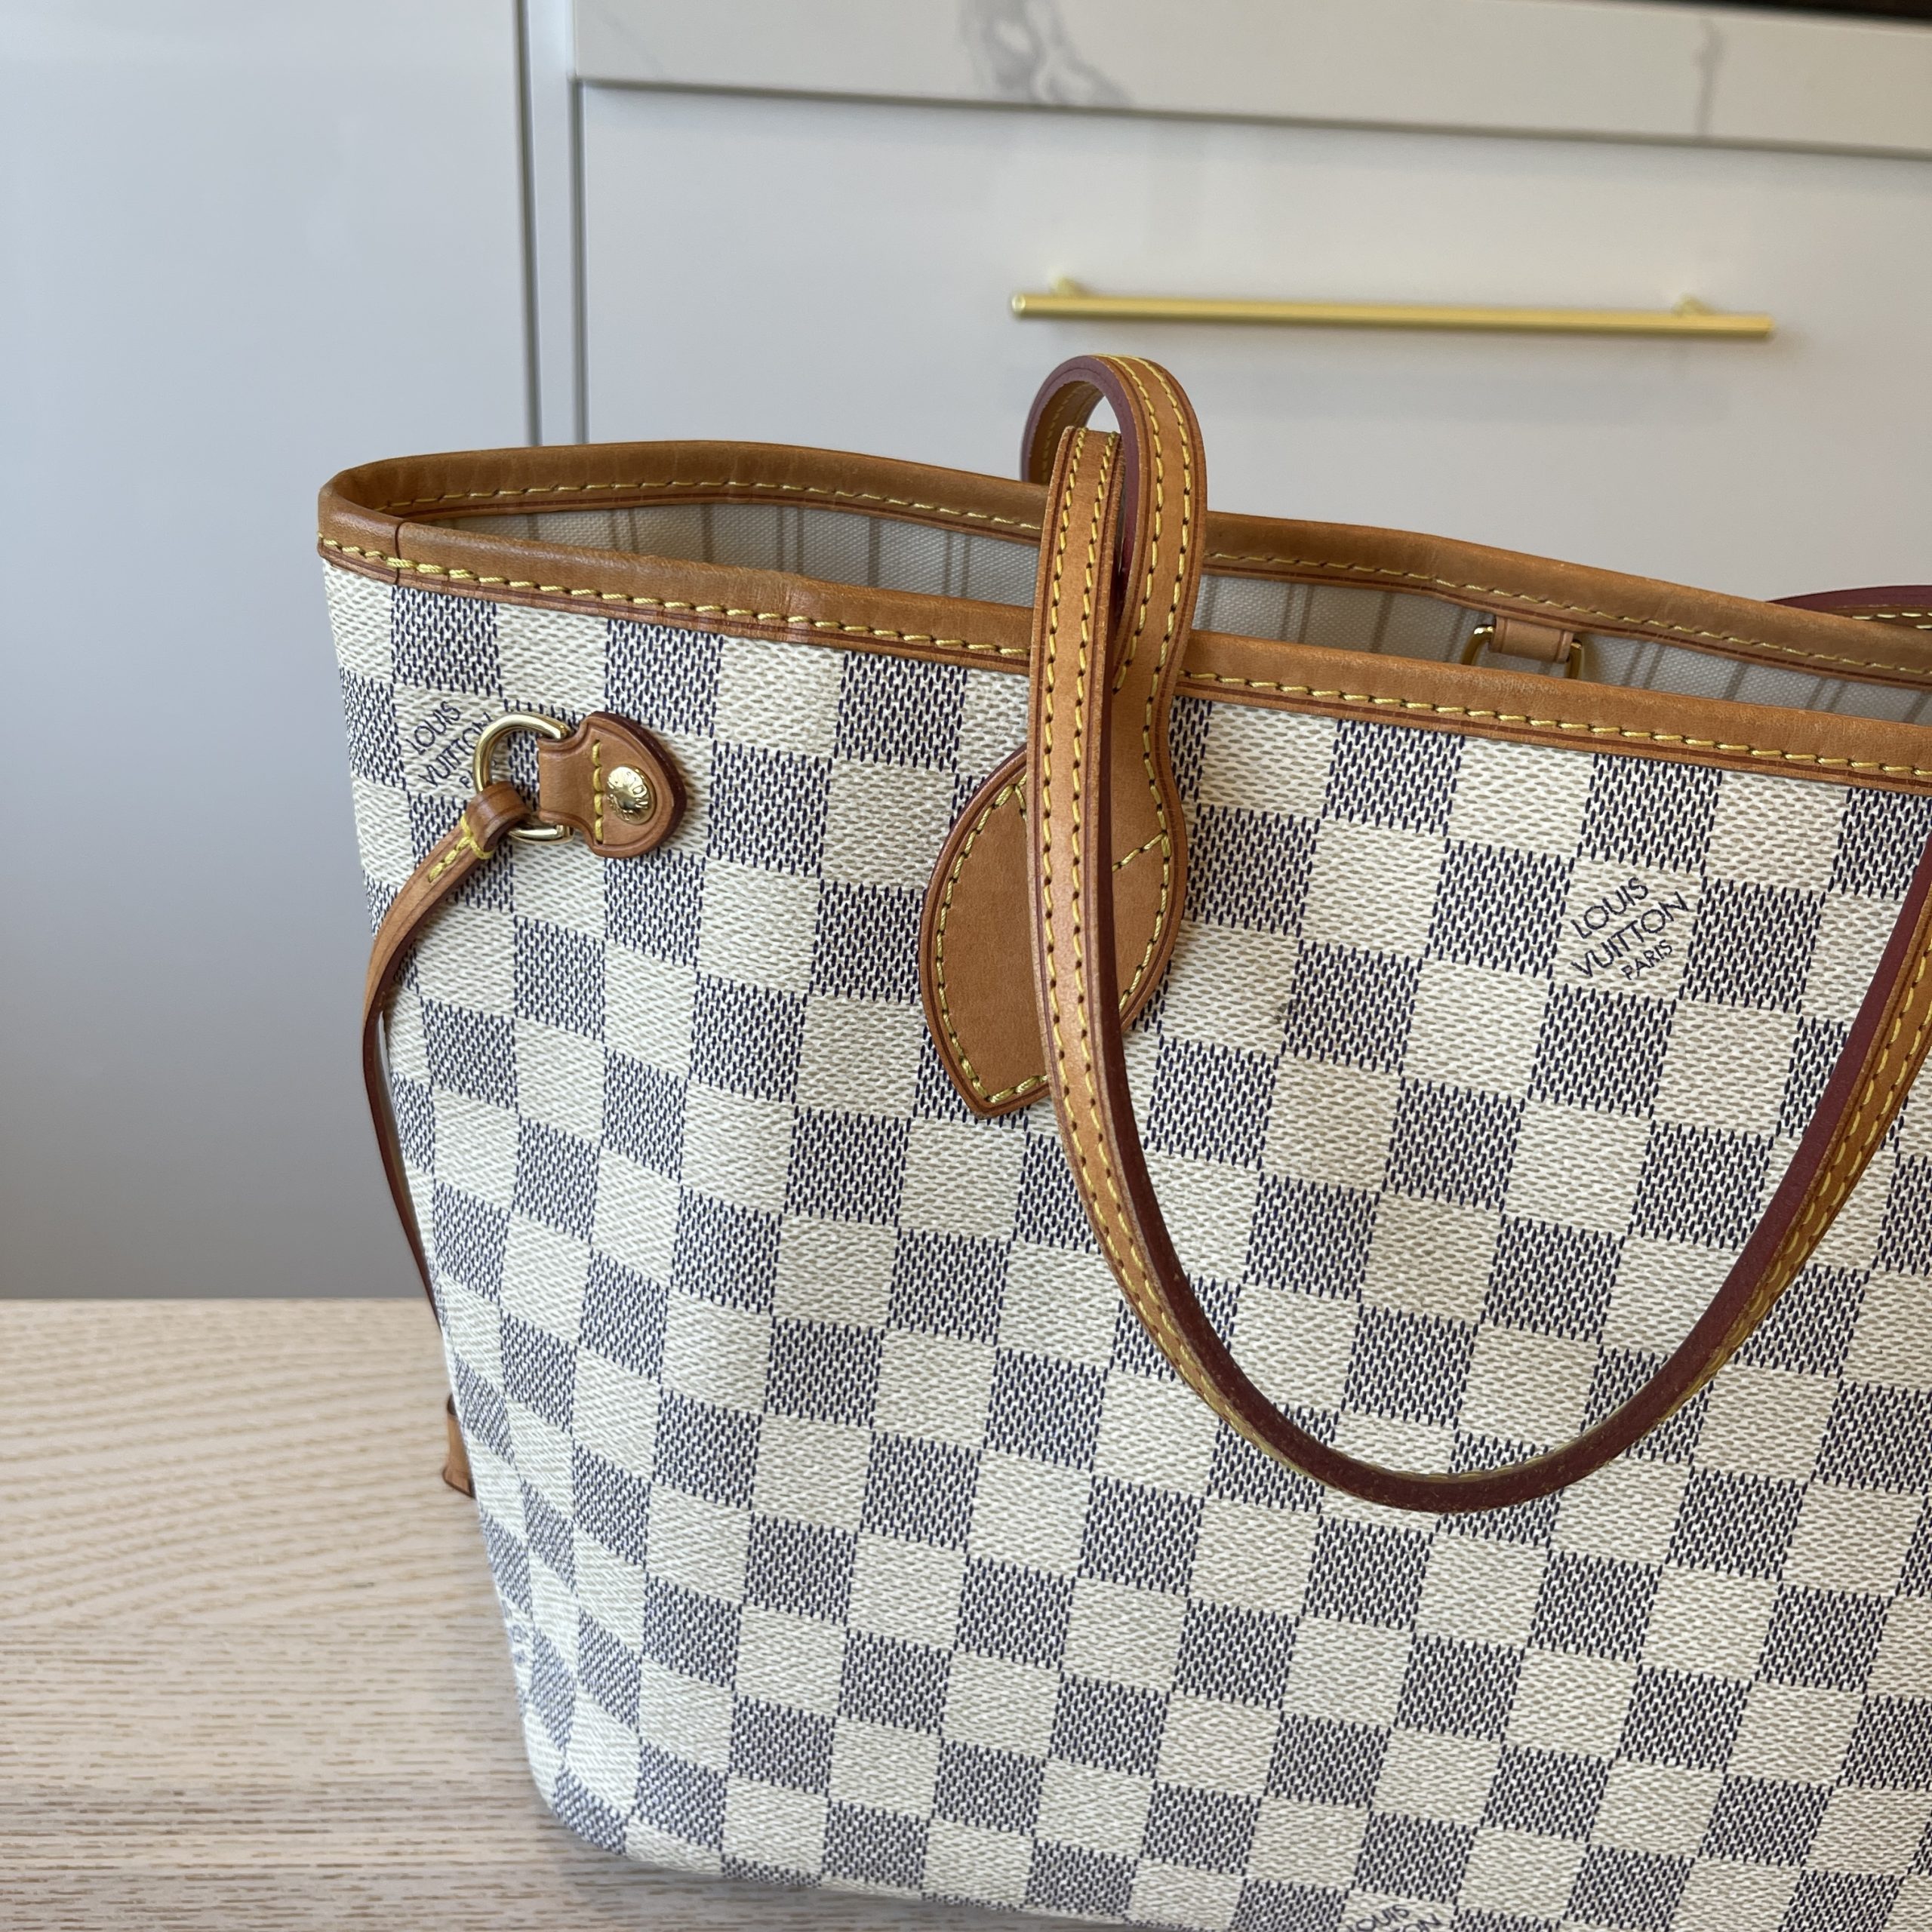 Initial Review ~ Neverfull PM Damier Azur ~ From Anne/Venus 